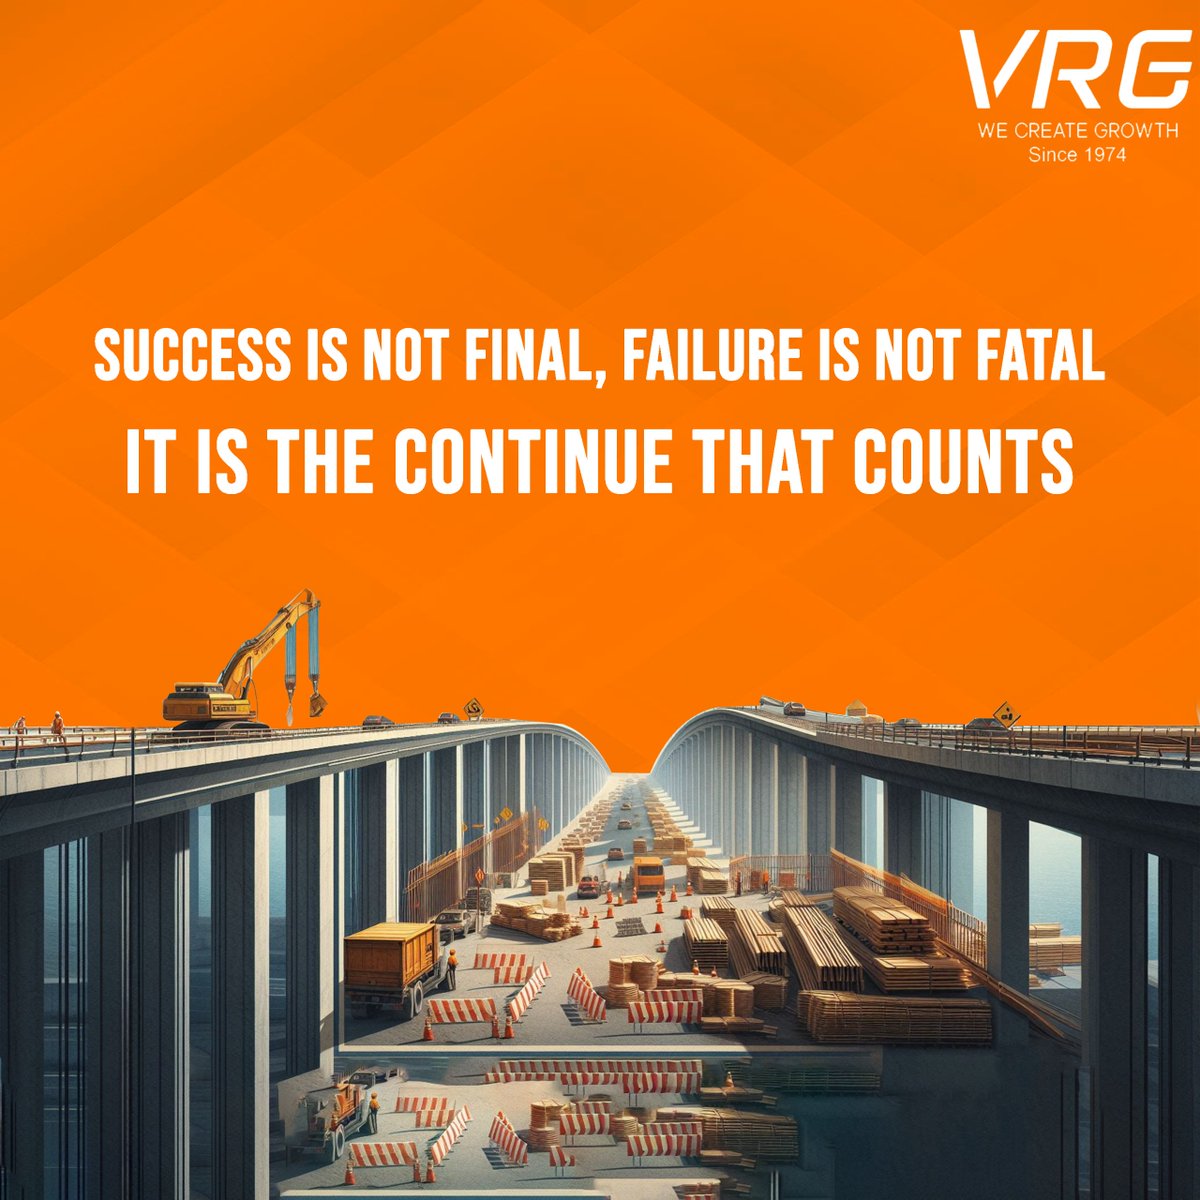 This emphasizes the importance of perseverance and resilience in the face of challenges. Success and failure are not endpoints but rather part of a continuous journey.

#Rasappanandco #vrggroup #vrgconcrete #karur #buildingmaterial #building #india #construction #concrete